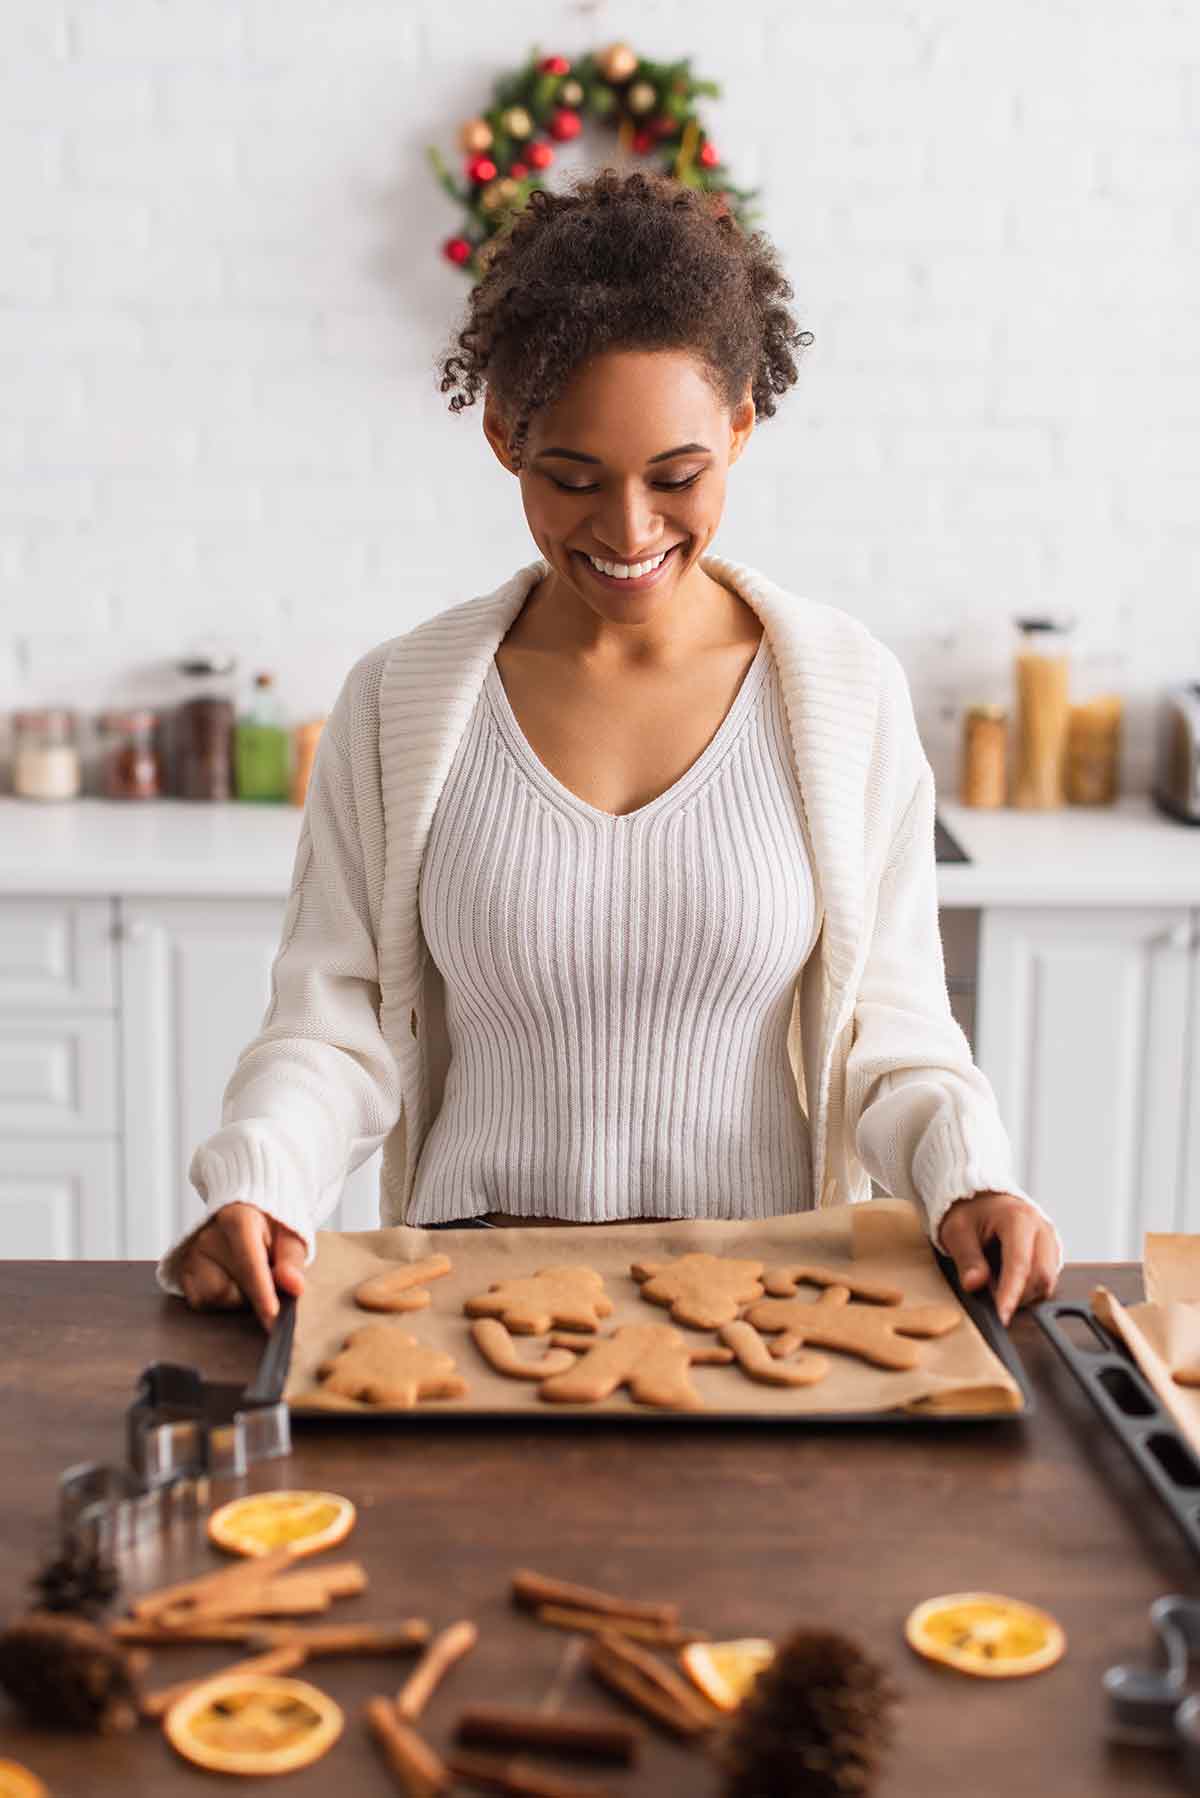 A woman holding a baking tray of gingerbread cookies